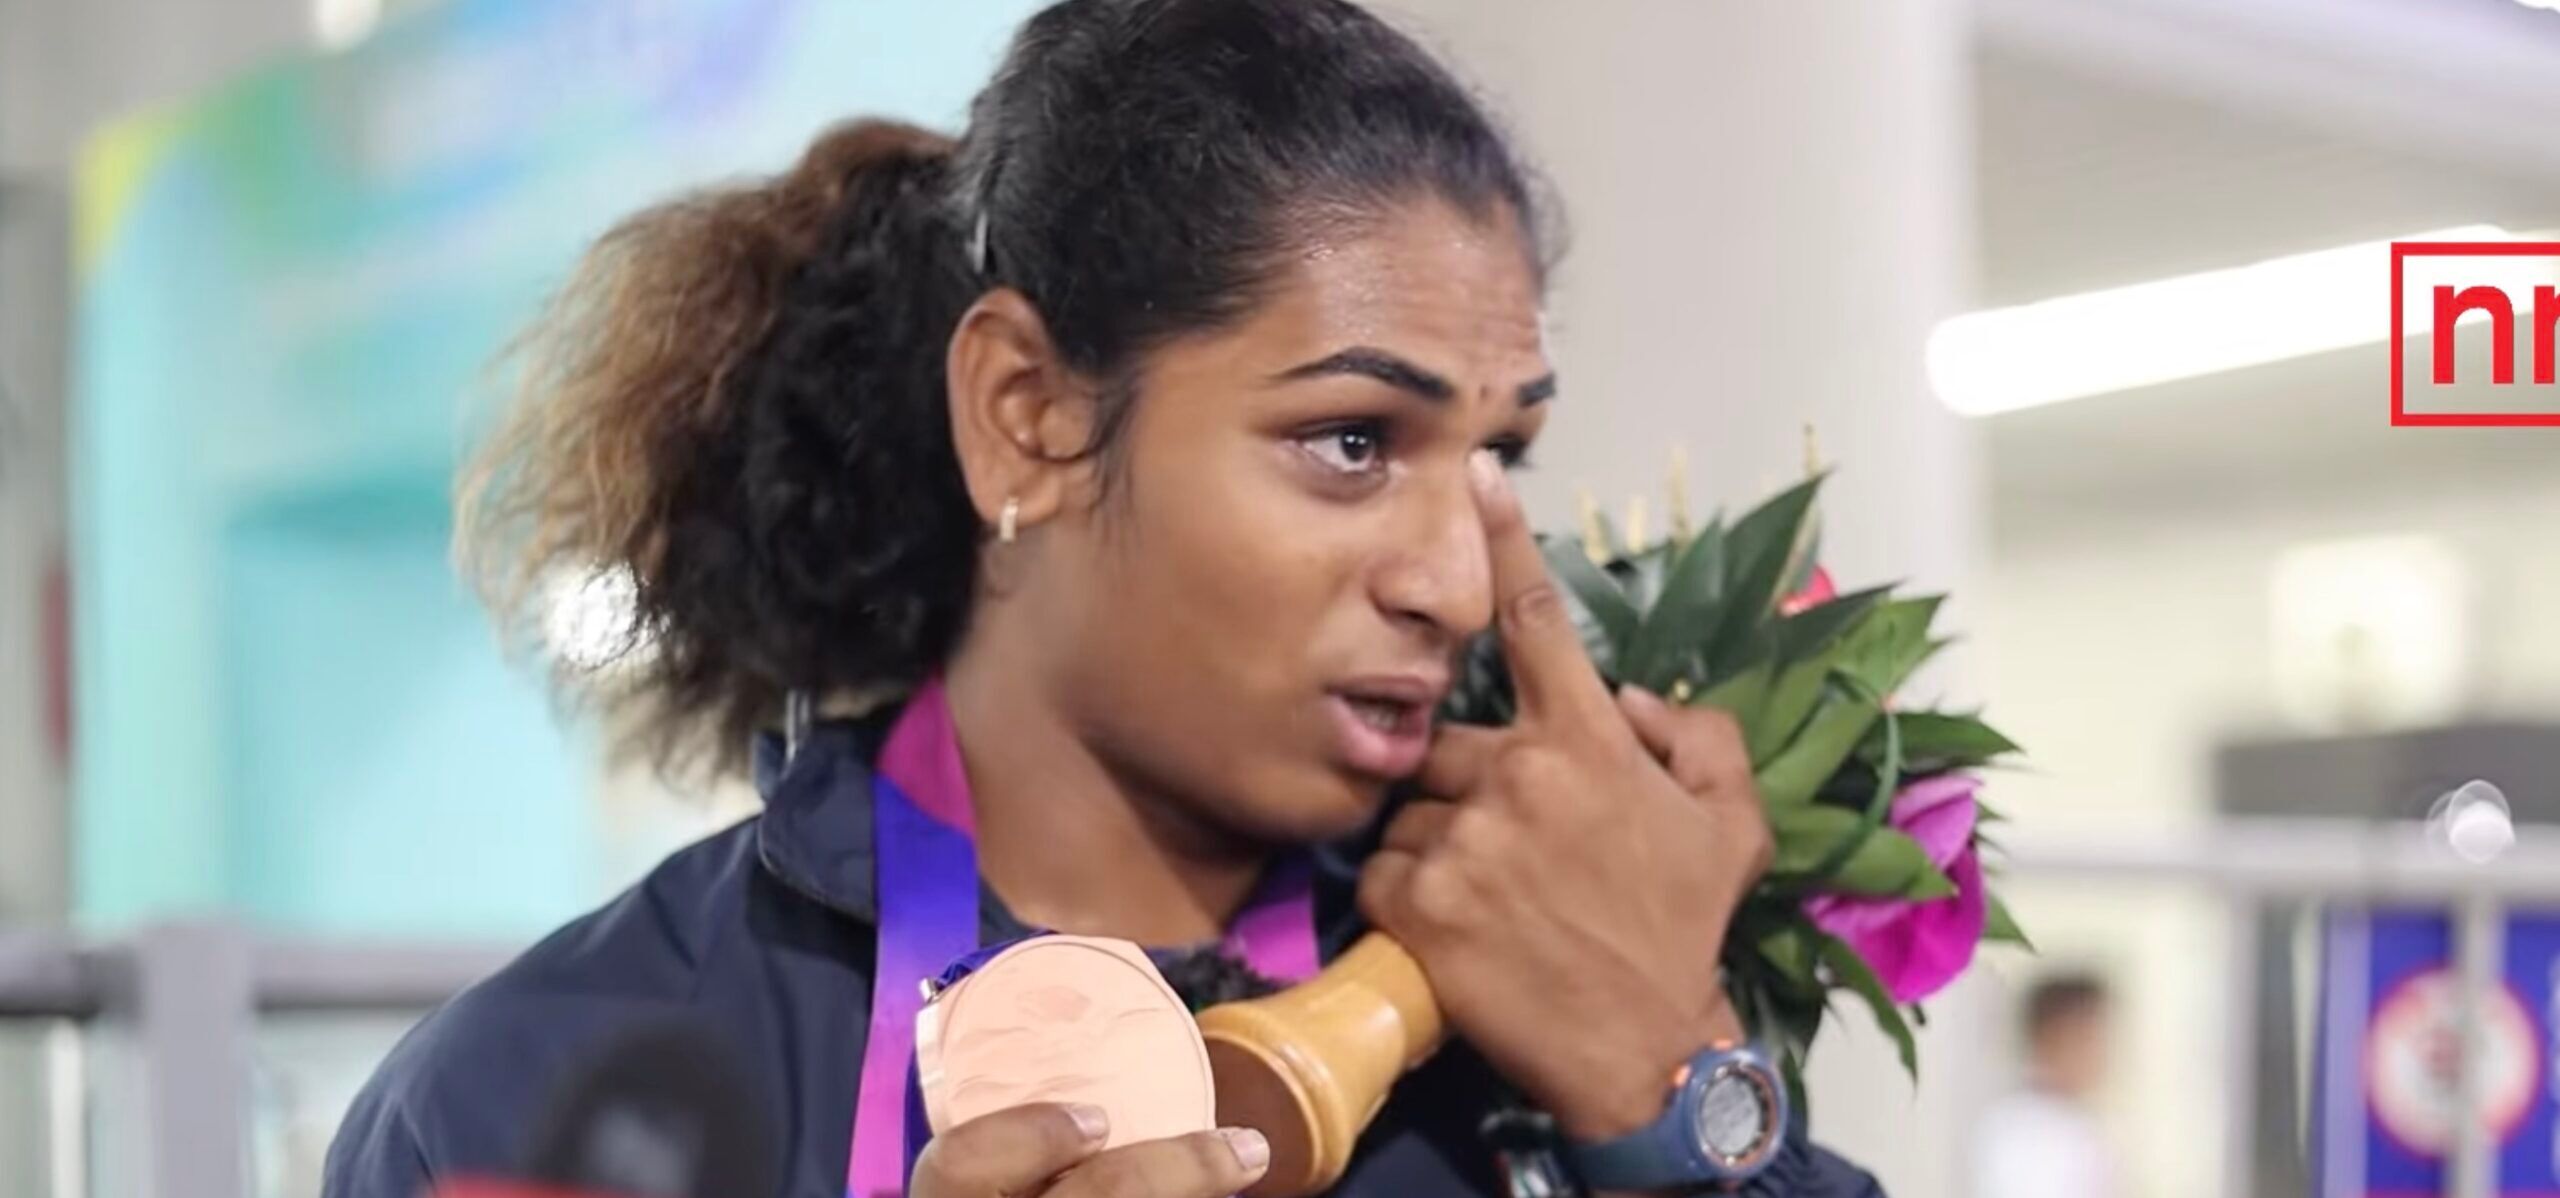 Nandini Agasara after winning the bronze medal at the Asian Games